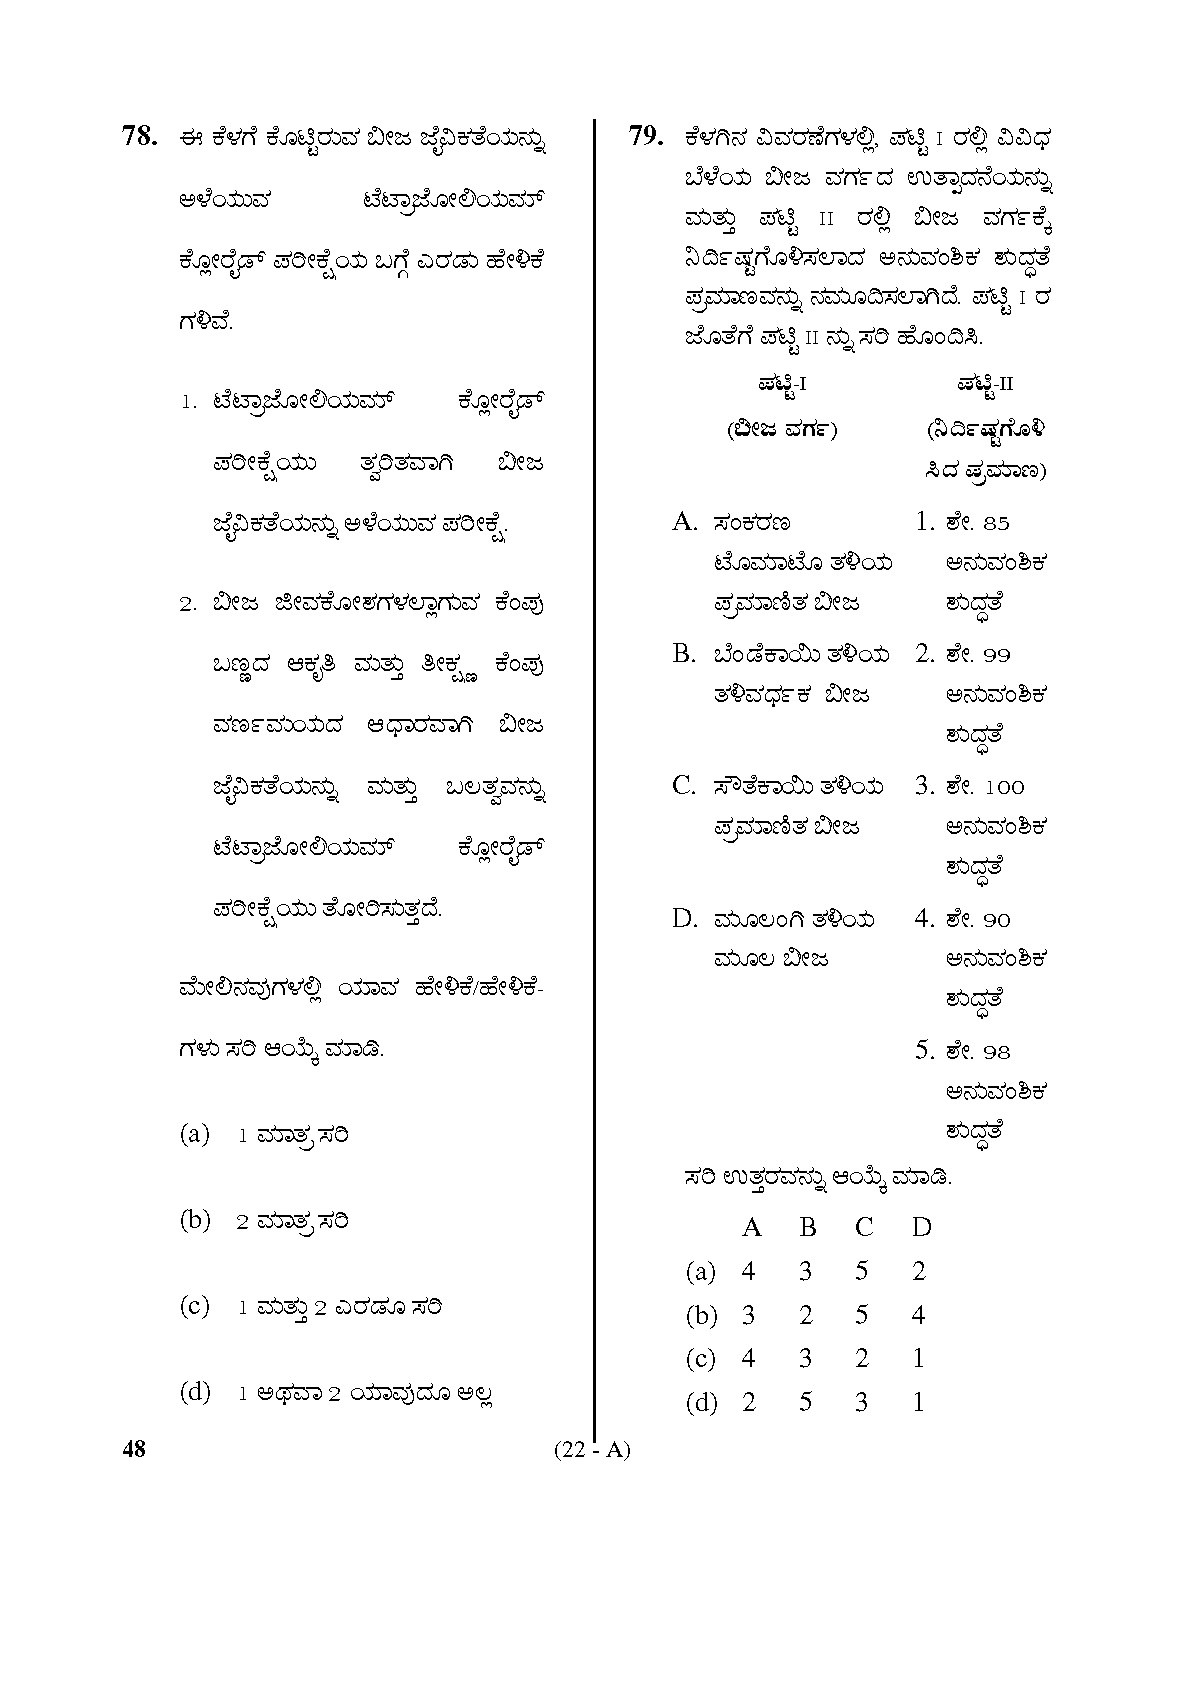 Karnataka PSC Assistant Horticulture Officer Exam Specific Paper 22